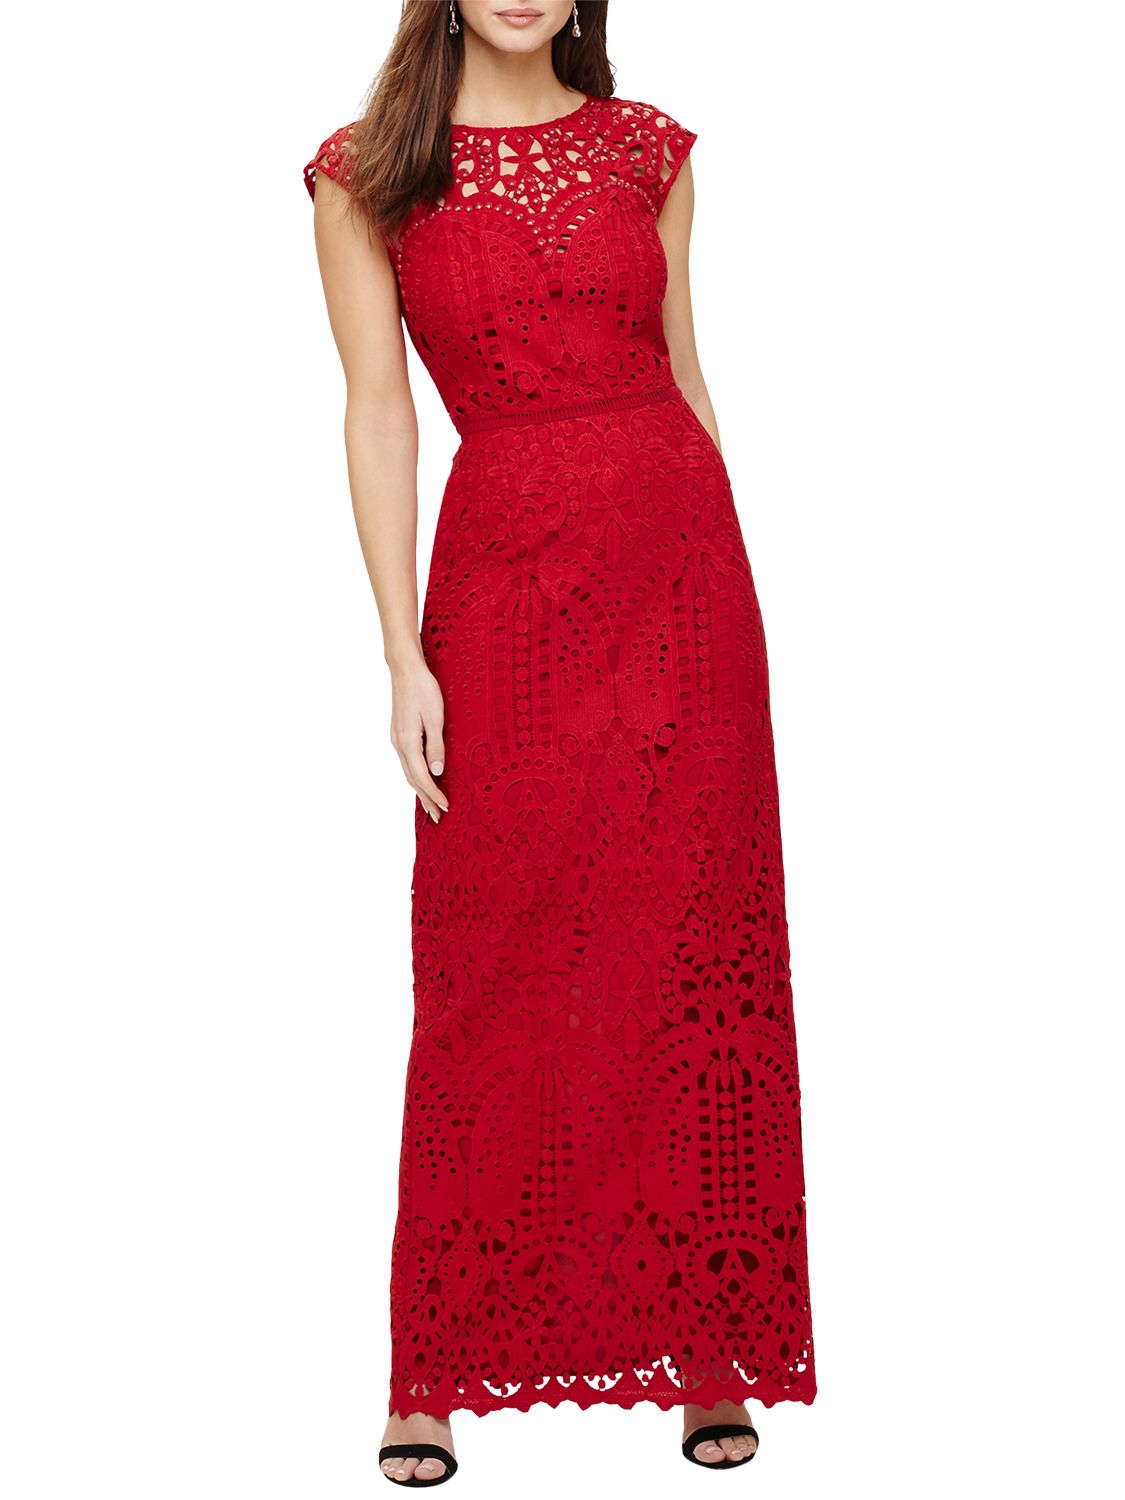 Phase Eight Collection 8 Gloria Lace Dress